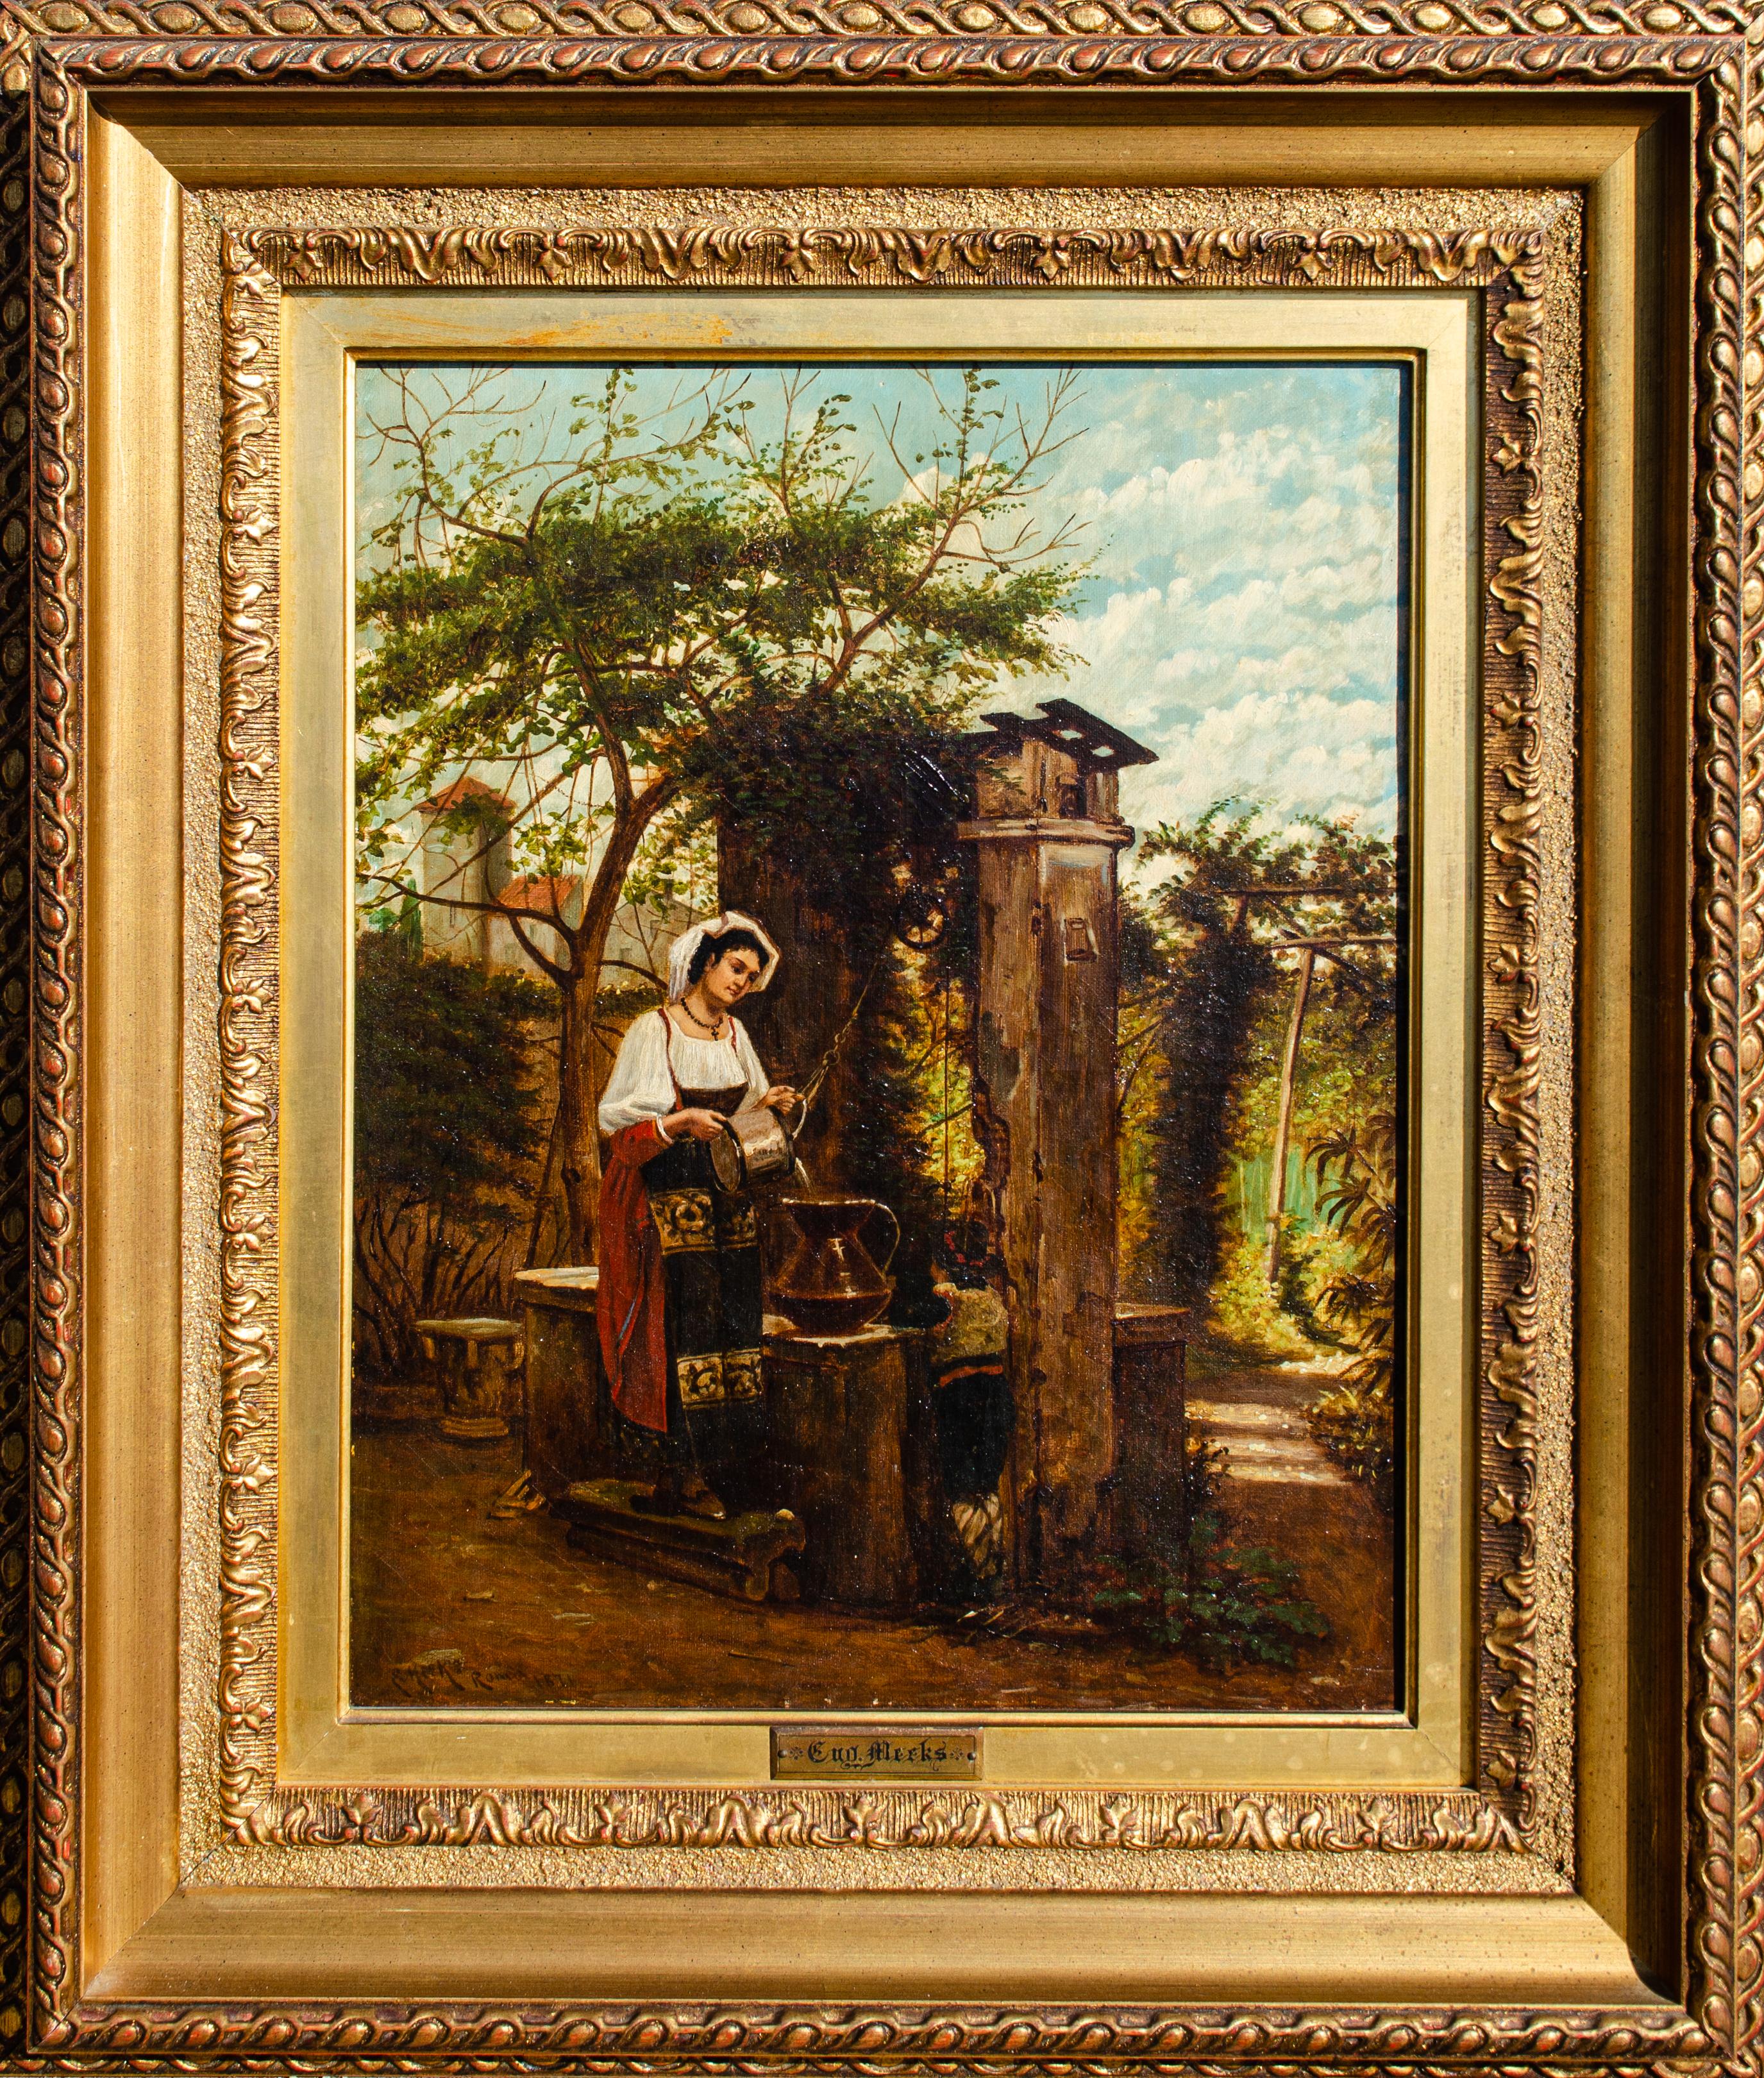 Eugene Meeks English oil painting of a woman at a well titled 